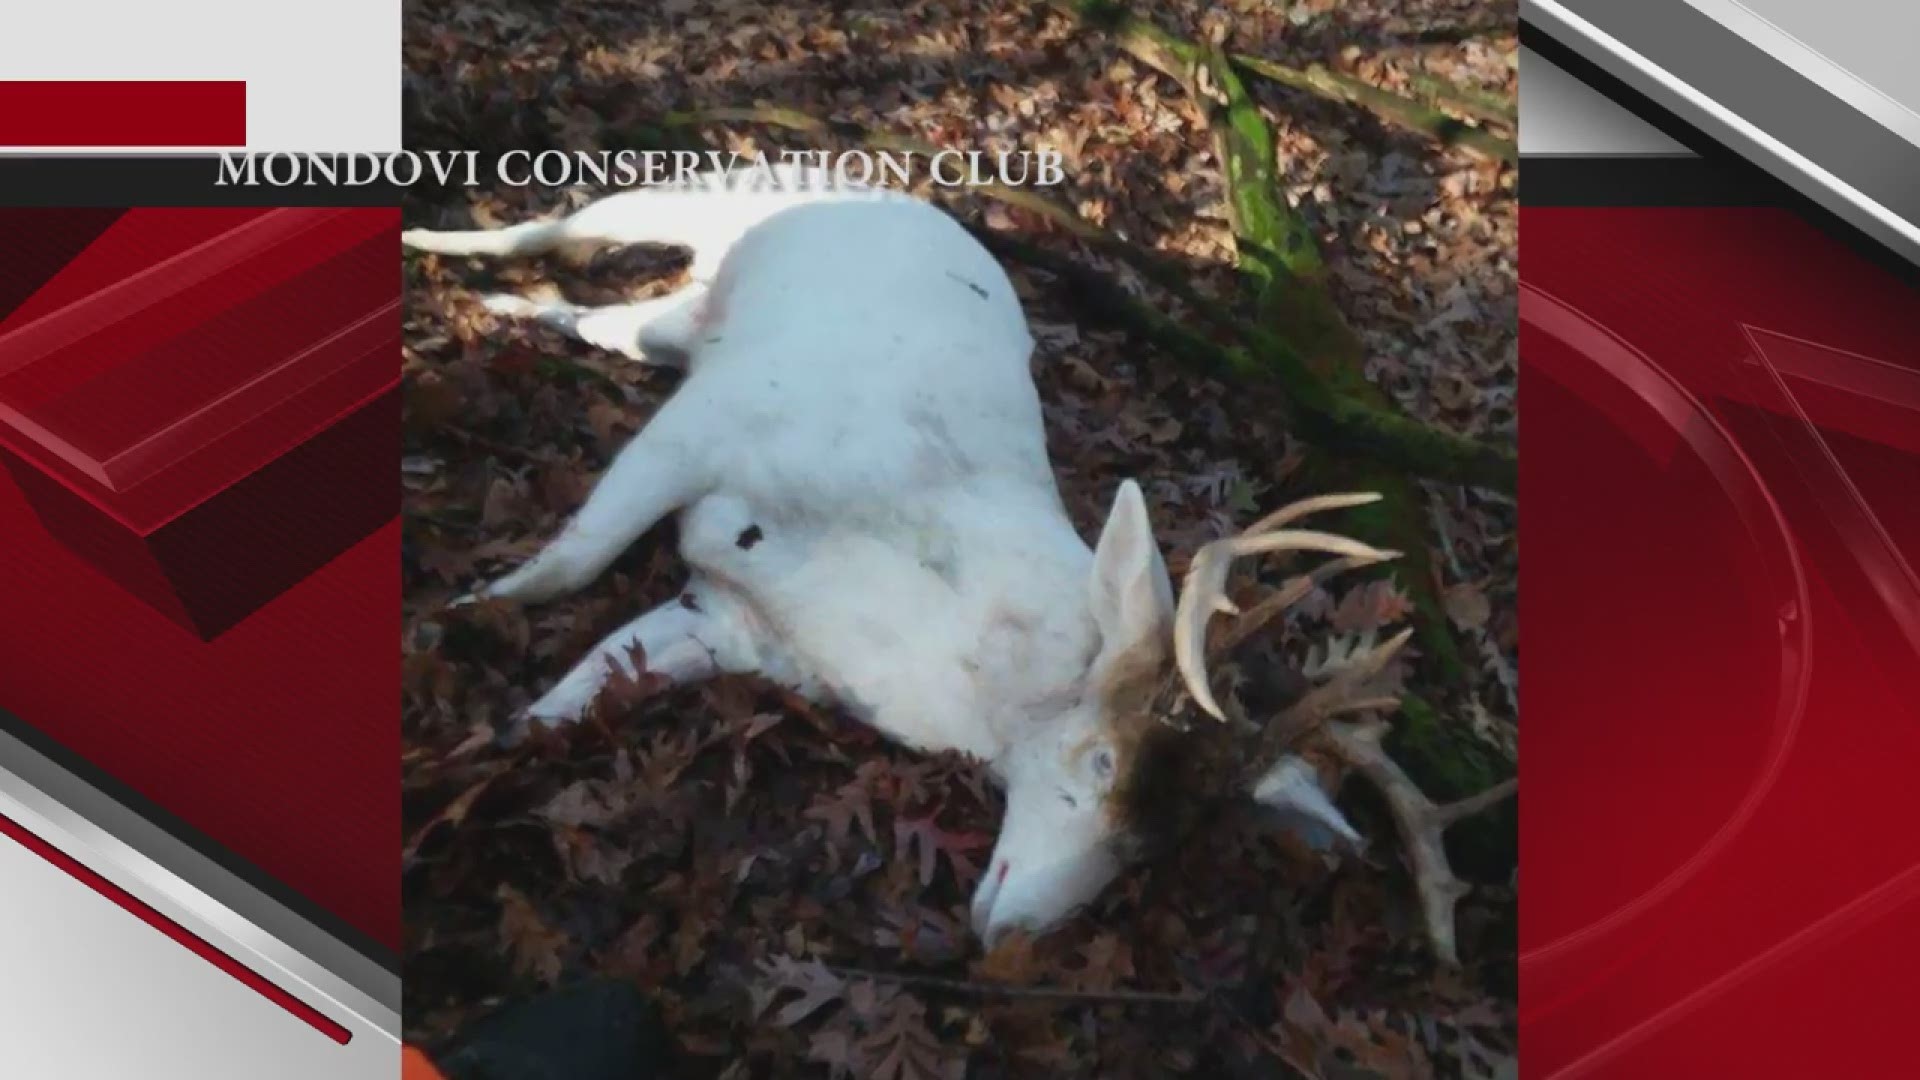 A Wisconsin hunter says he fired his gun after seeing a brown patch of fur, a moment that resulted in the death of a rare albino deer.